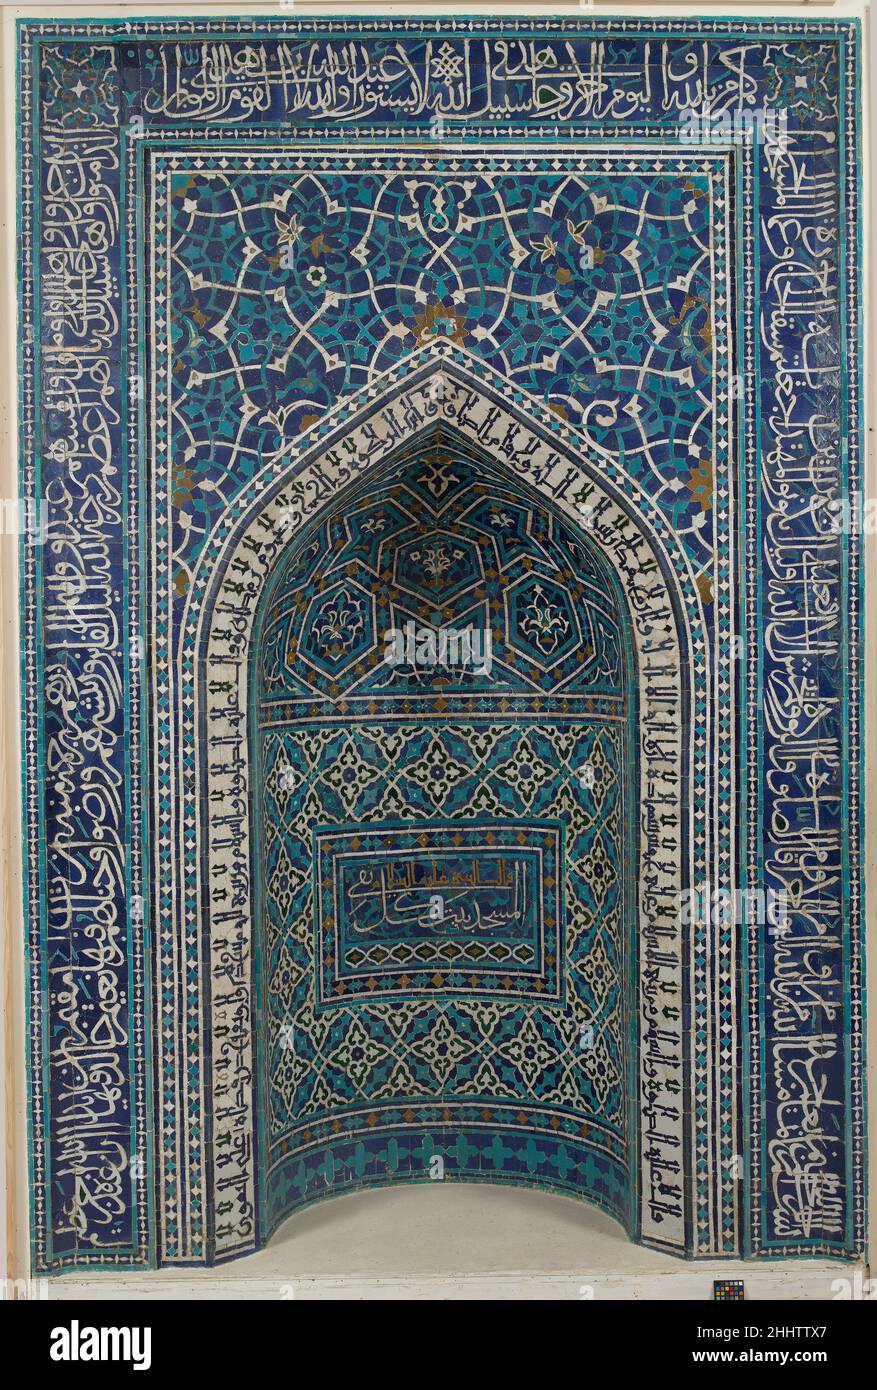 Mihrab (Prayer Niche) dated A.H. 755/ A.D. 1354–55 The most important element in any mosque is the mihrab, the niche that indicates the direction of Mecca, the Muslim holy pilgrimage site in Arabia, which Muslims face when praying. This example from the Madrasa Imami in Isfahan is composed of a mosaic of small glazed tiles fitted together to form various patterns and inscriptions. Qur'anic verses run from the bottom right to the bottom left of the outer frame; a second inscription with sayings of the Prophet, in Kufic script, borders the pointed arch of the niche; and a third inscription, in c Stock Photo